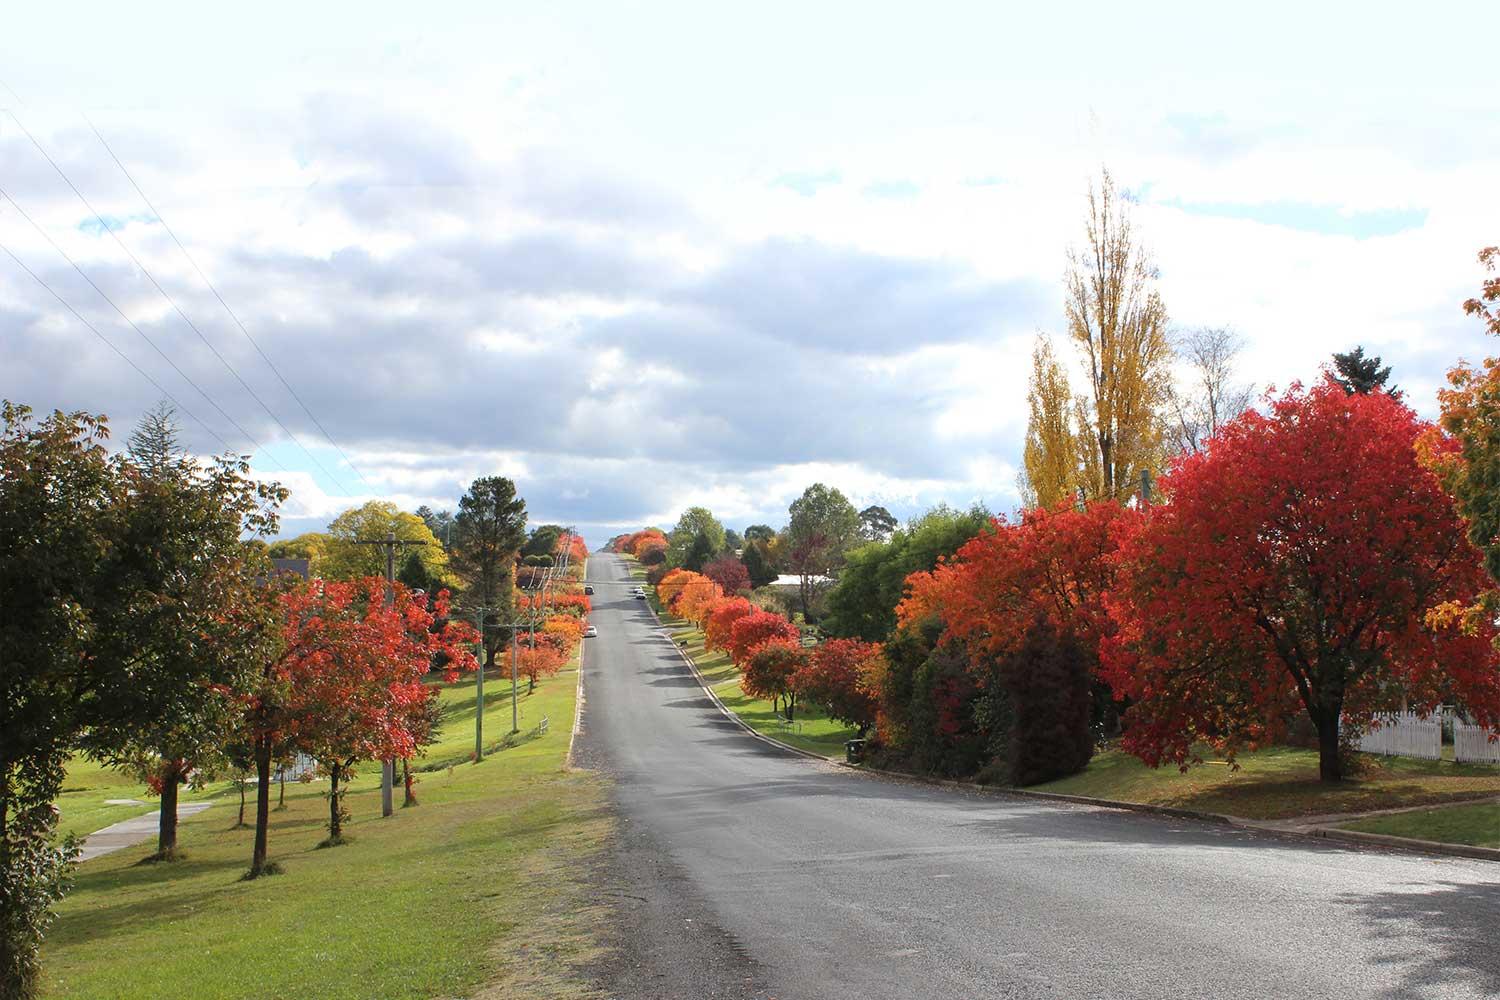 Walcha main street lined with brightly coloured trees in Autumn